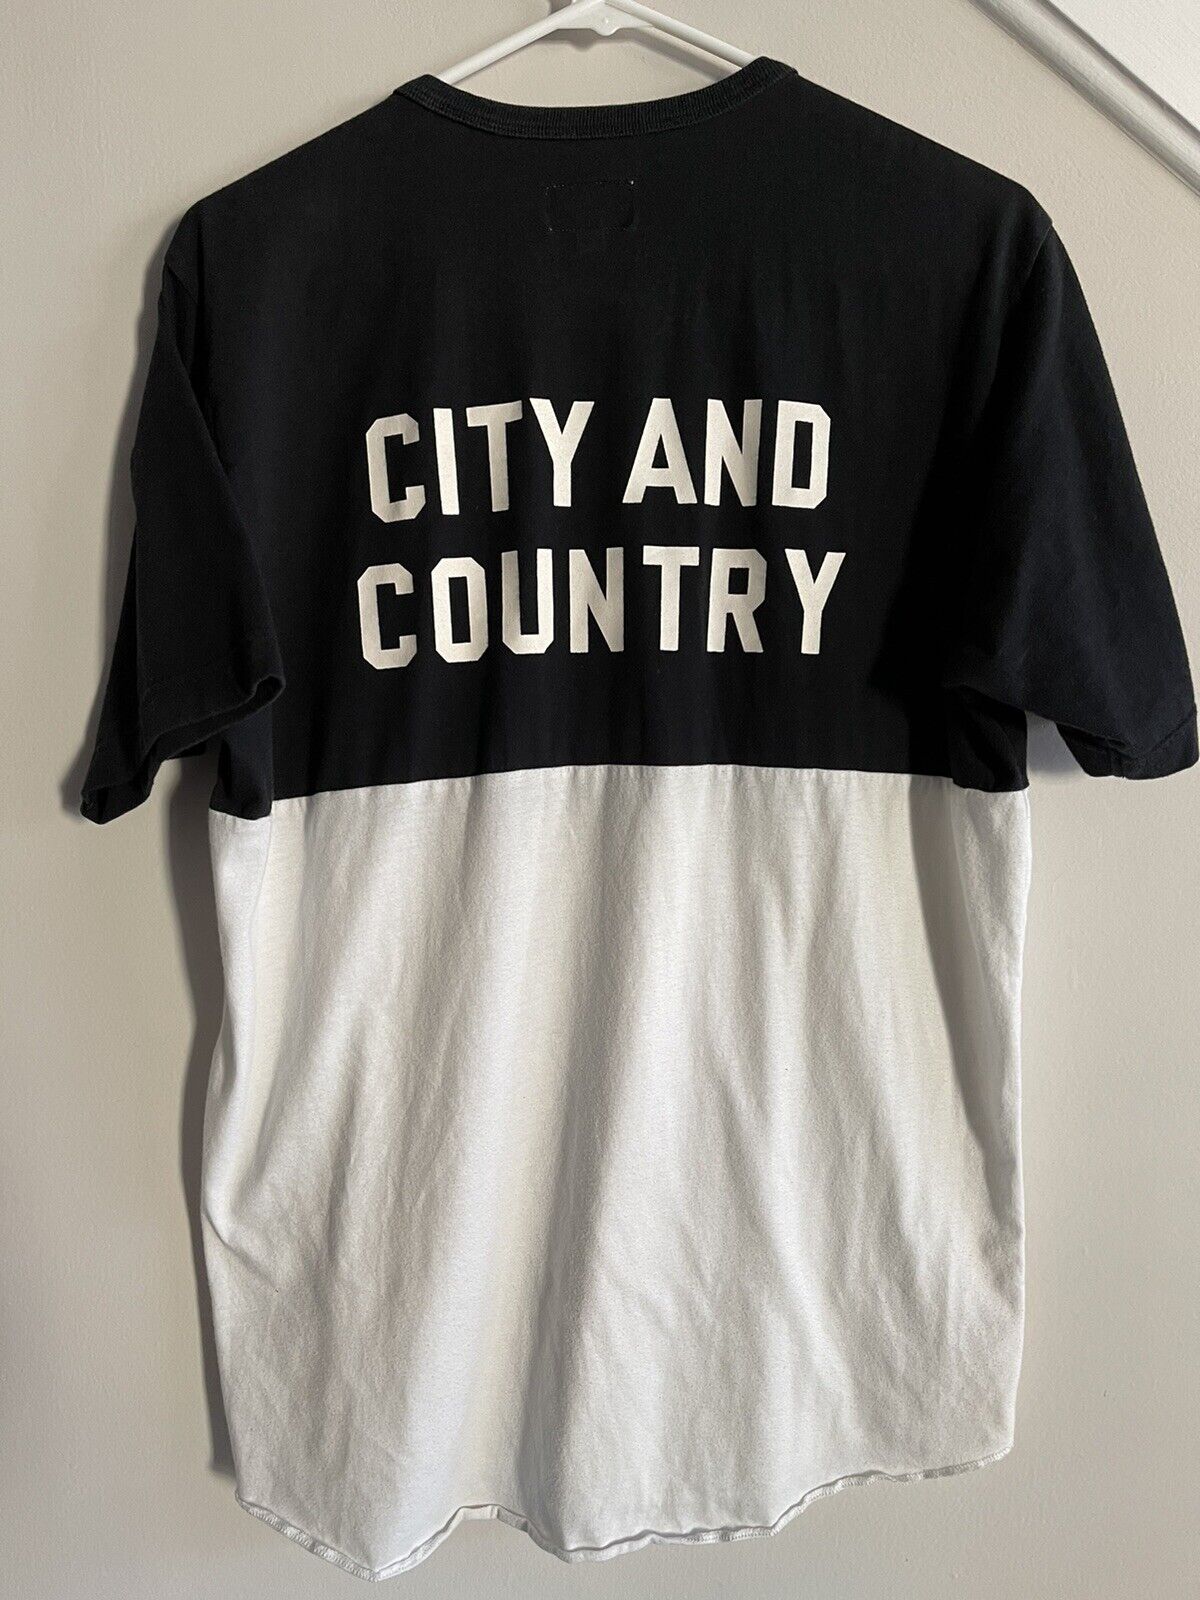 Supreme City and Country Henley Sleeve Shirt M S/S 2012 box logo off-white  huf